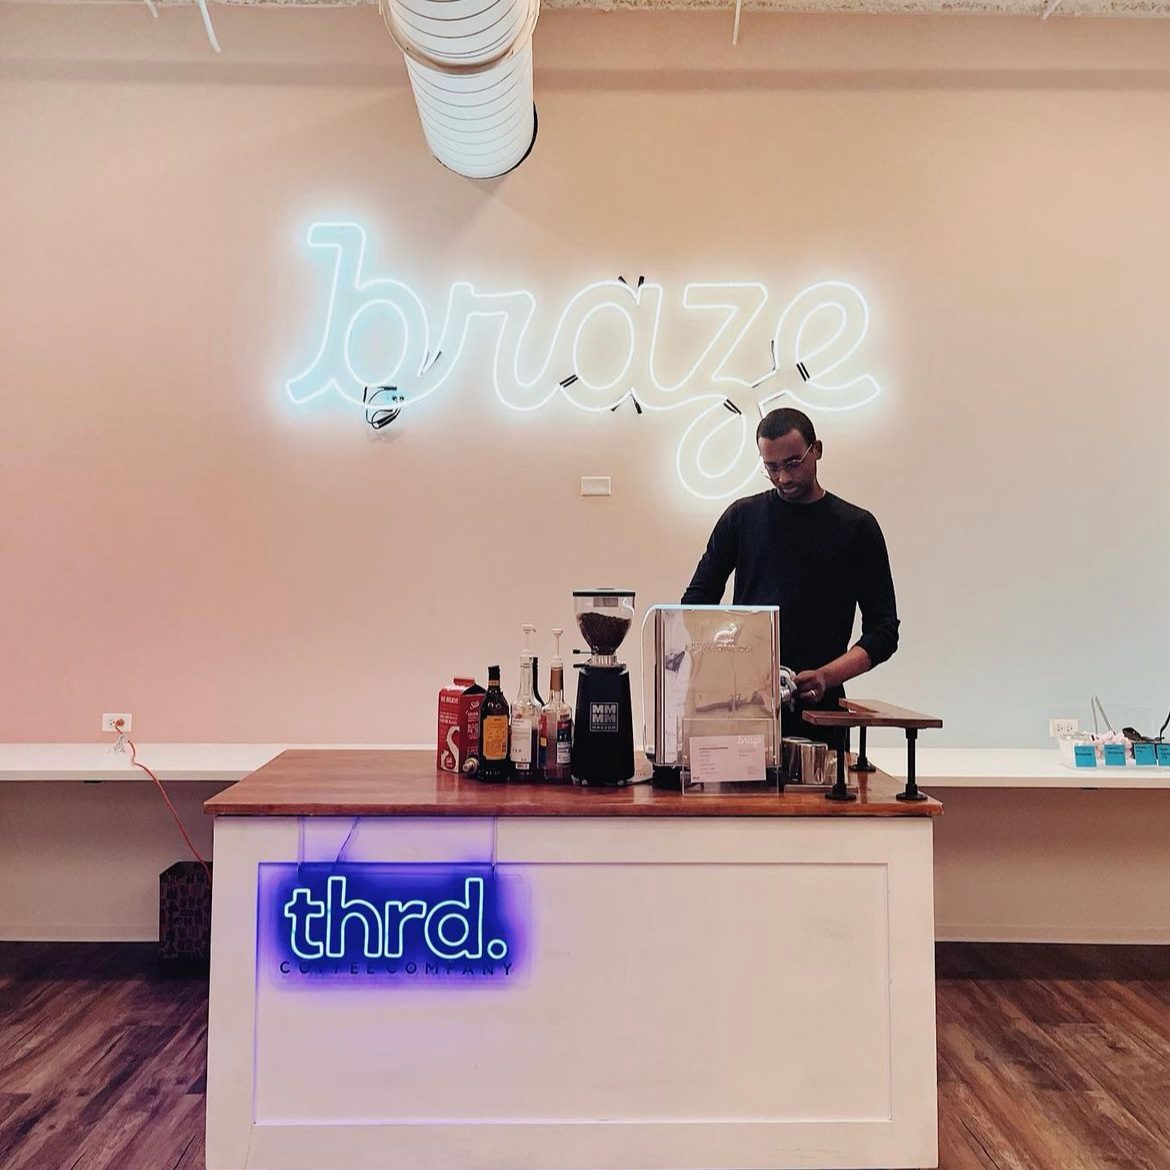 Photo shows the Thrd Coffee Company mobile coffee cart inside an office space. An employee stands behind the cart, pouring some coffee. Behind him and the cart is a wall that has a white neon sign on it that says "brave" in a script font.